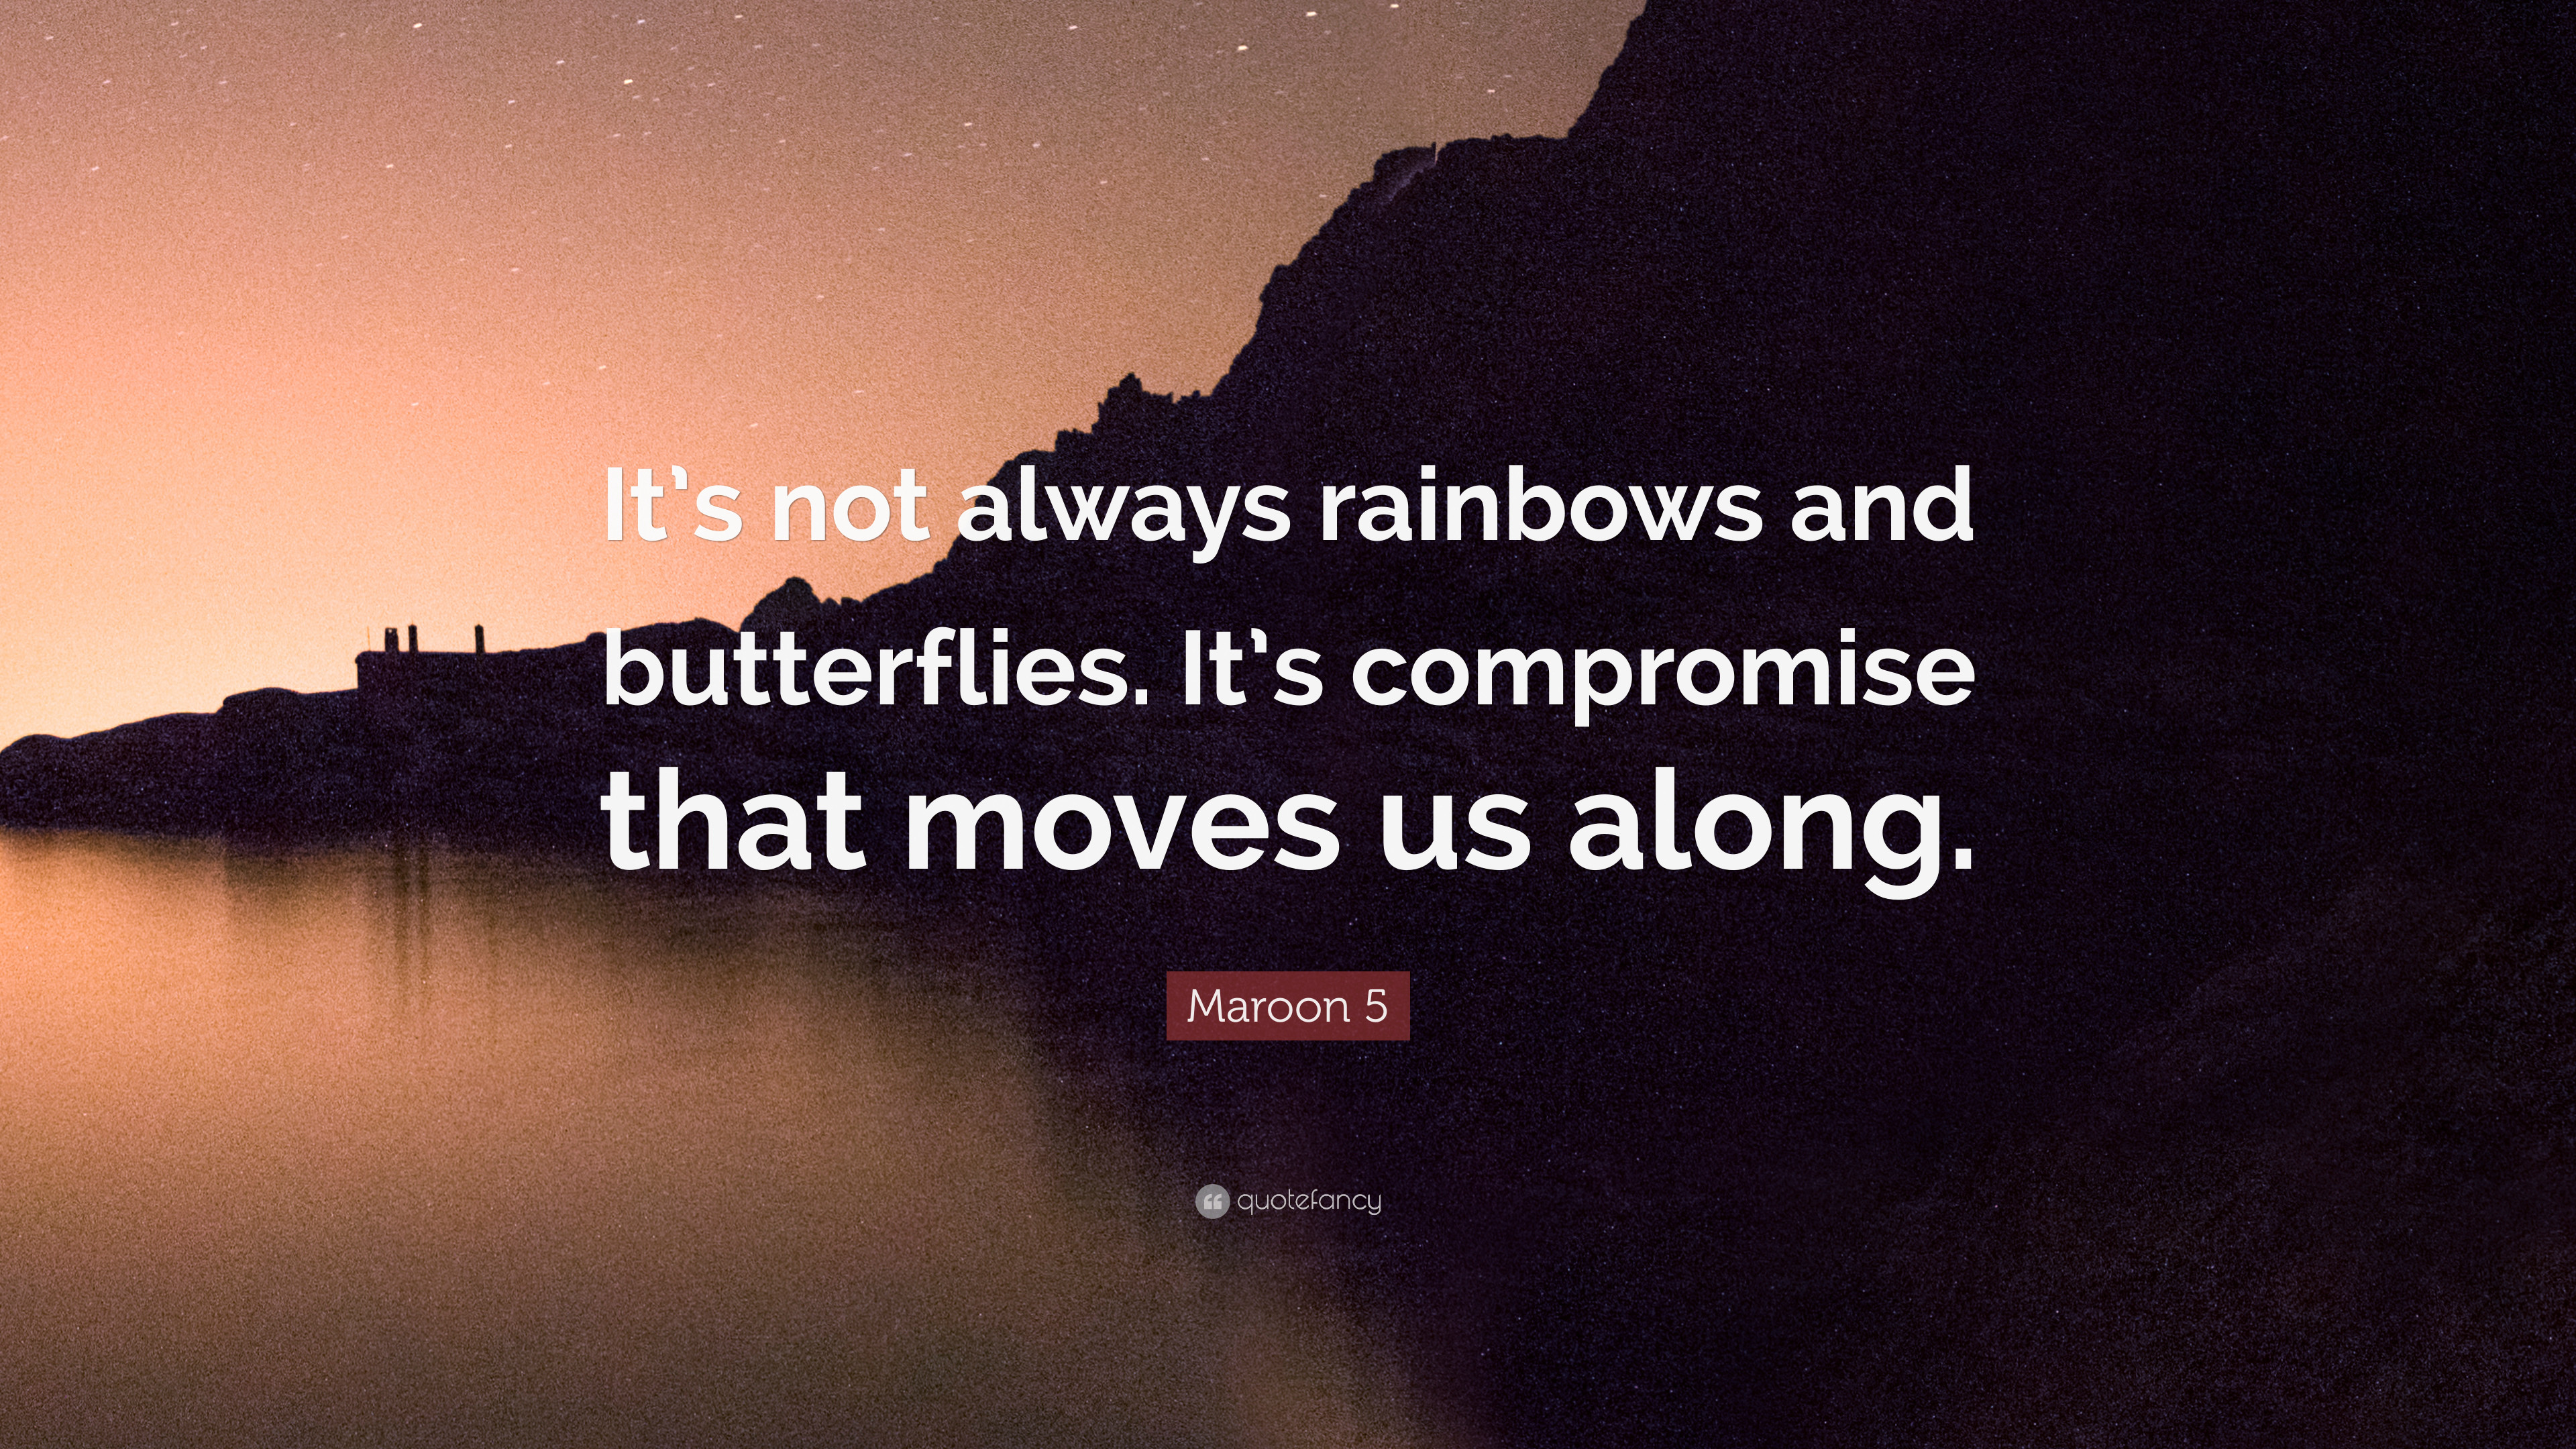 3840x2160 Maroon 5 Quote: “It's not always rainbows and butterflies. It's compromise  that moves